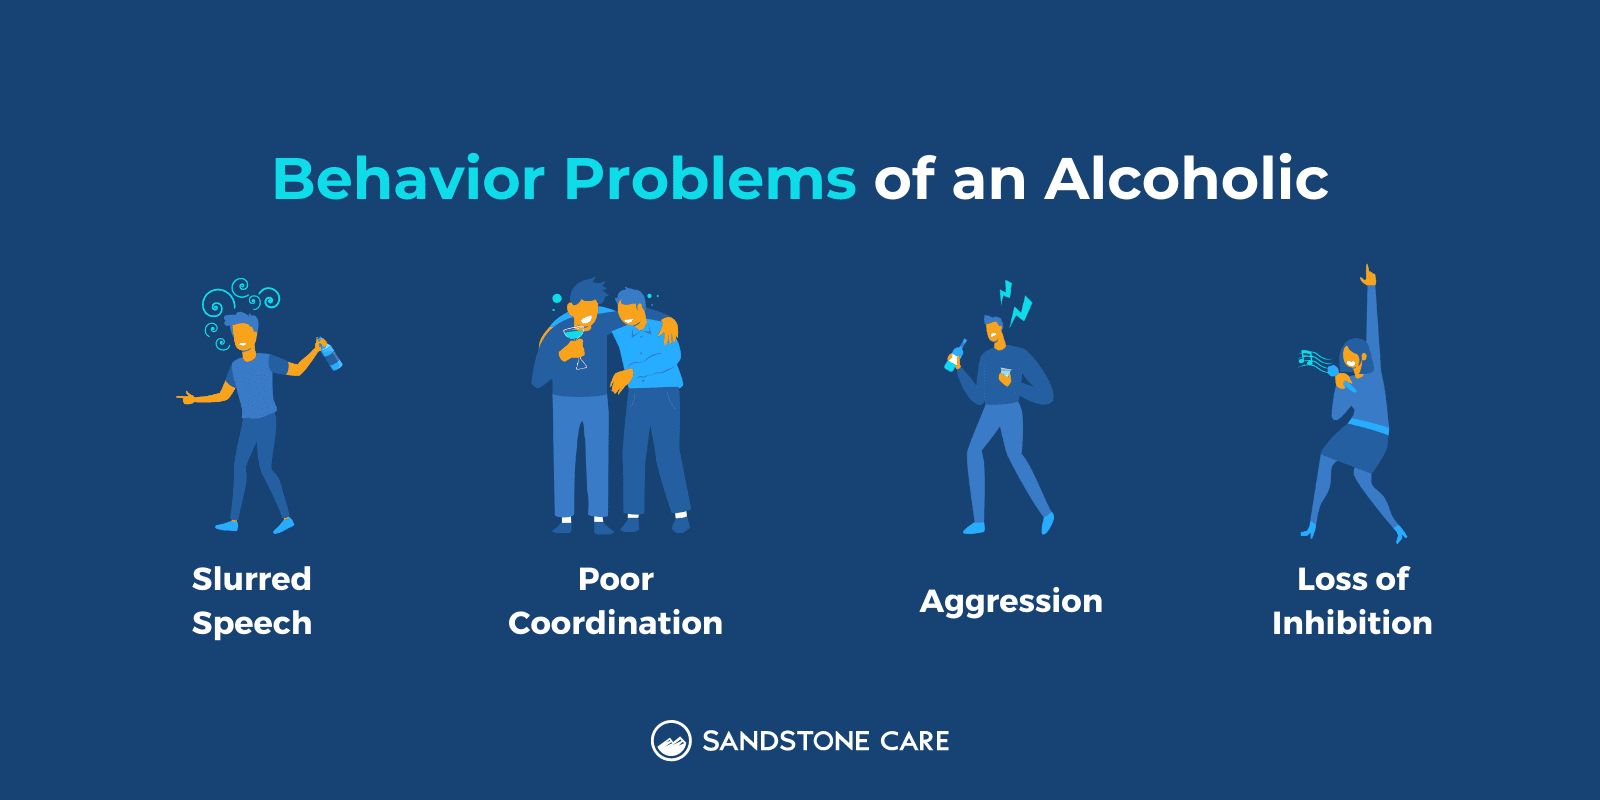 A visual infographic titled 'Behavior Problems of an Alcoholic' depicting various behavior problems that can arise when dealing with an alcoholic, including anger, neglect, dishonesty, and violence. The infographic uses digital illustrations and labels each behavior for clarity.